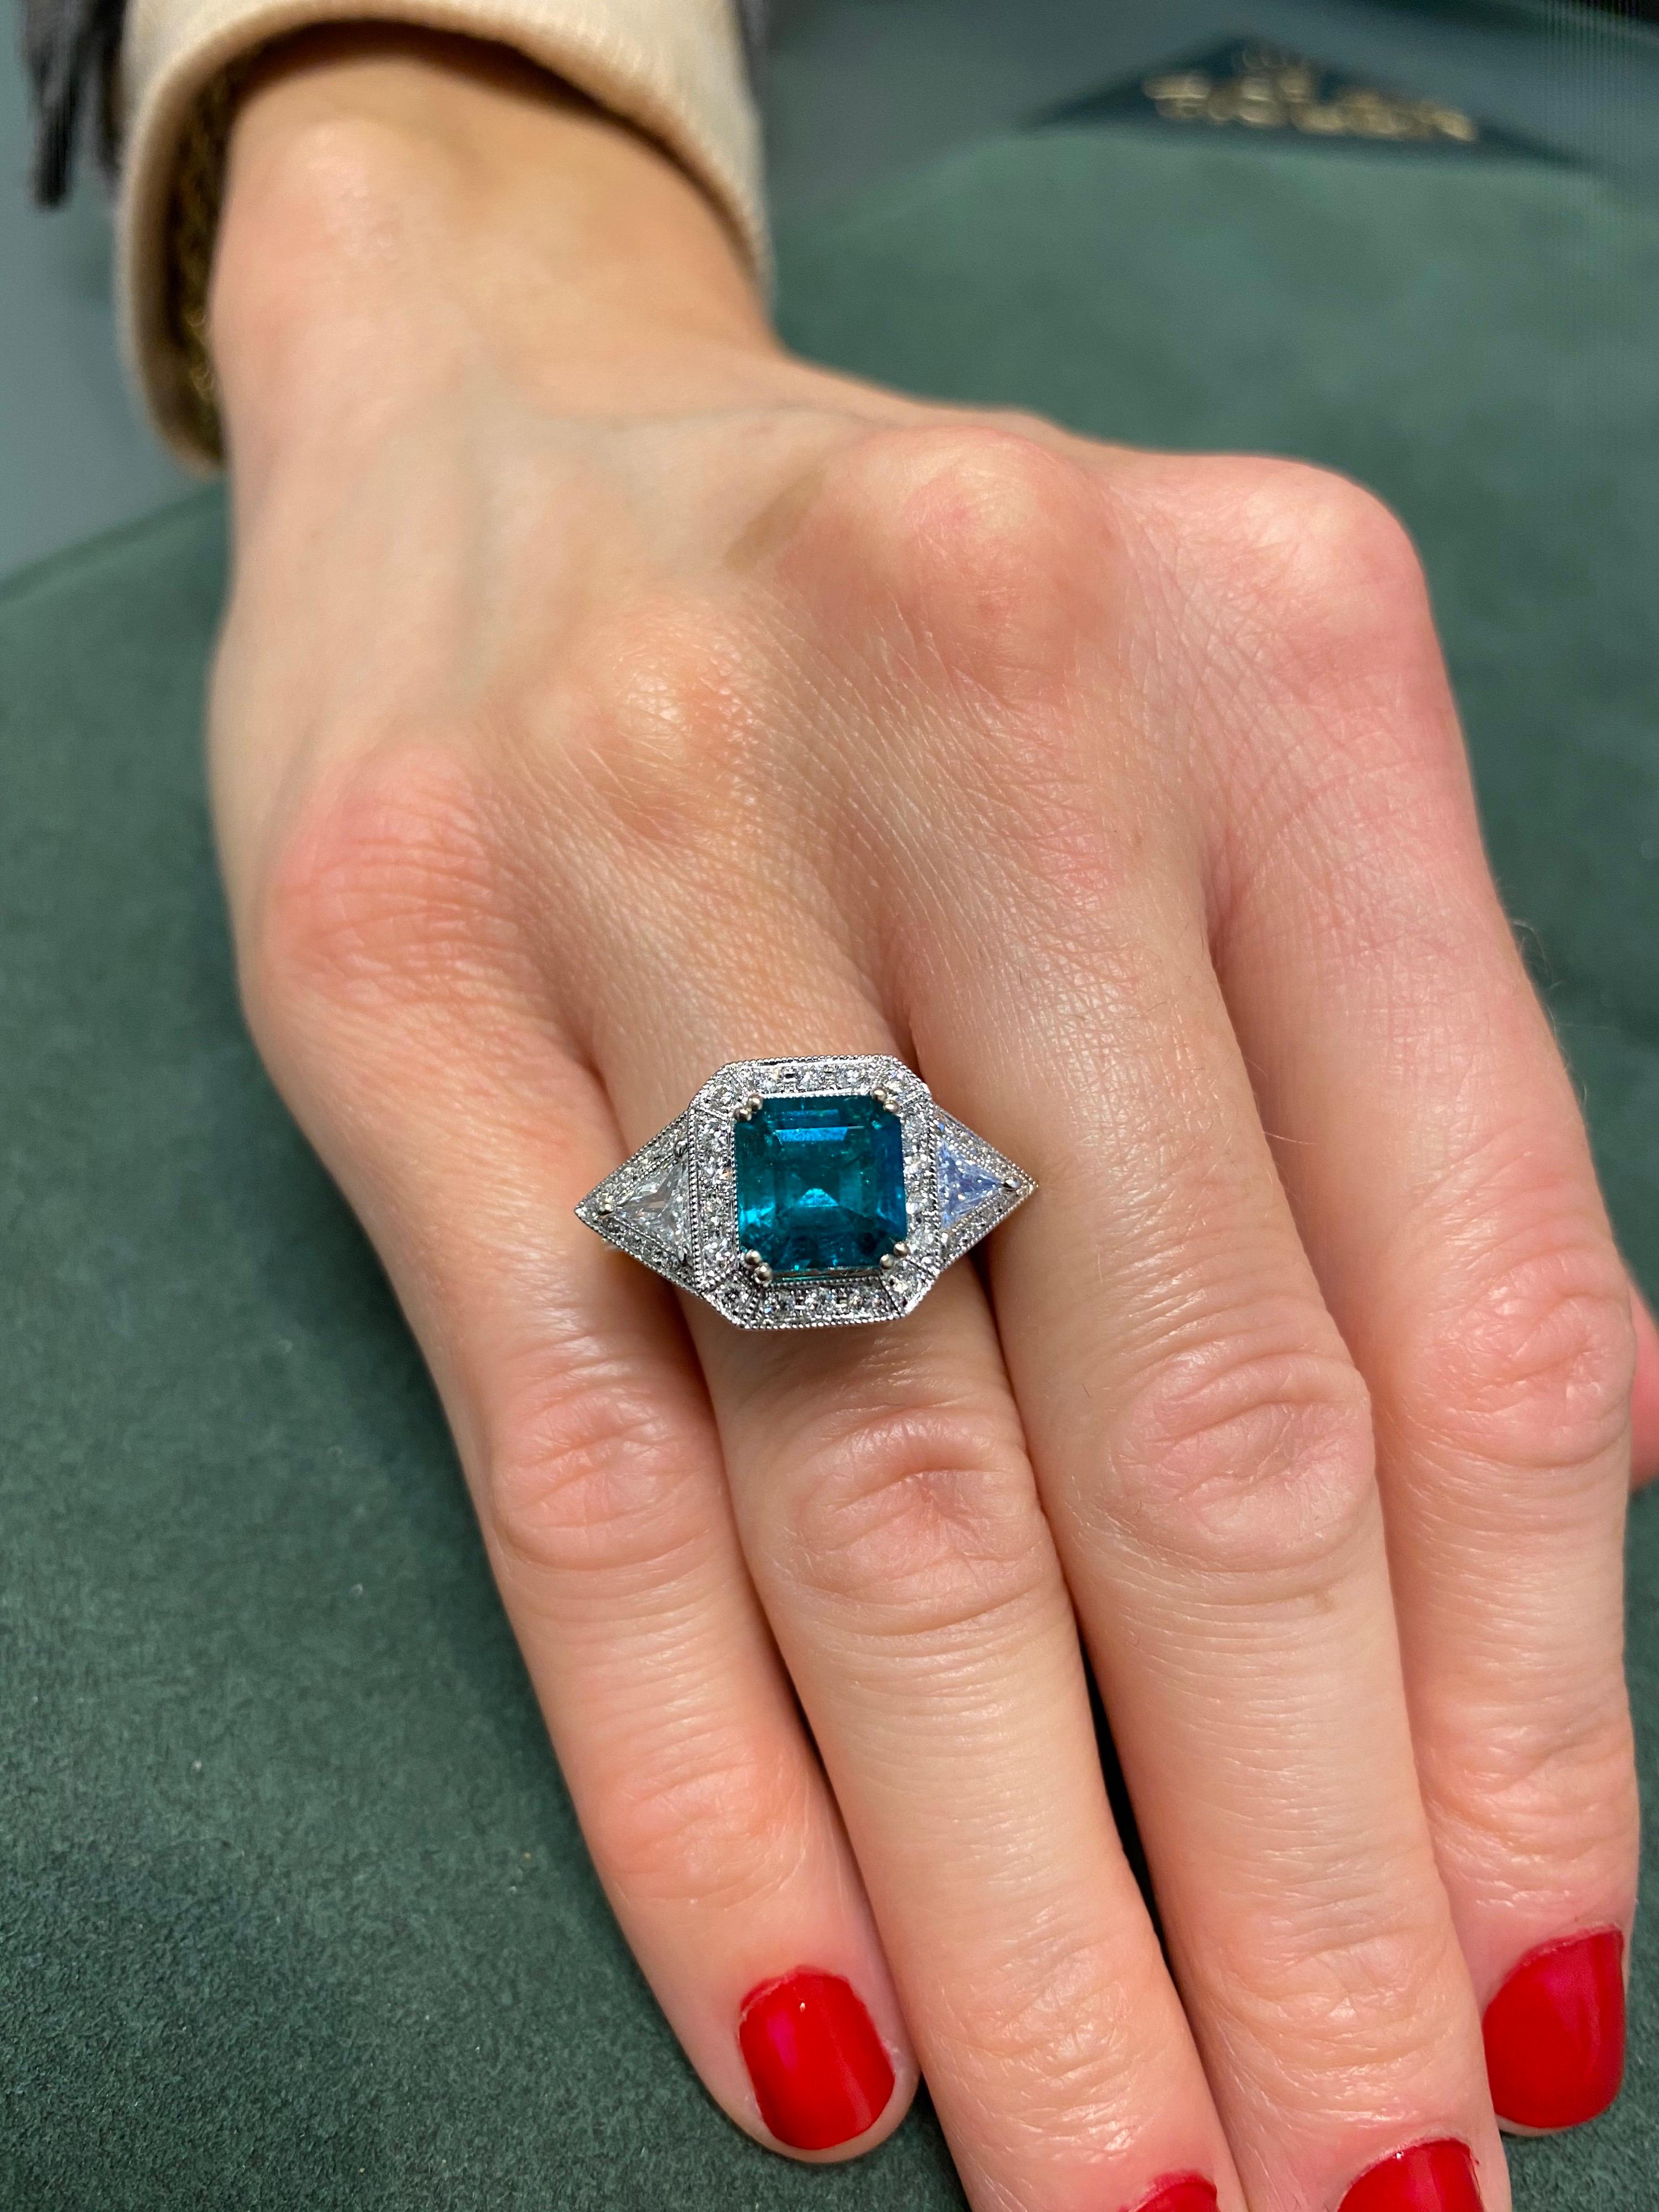 Exquisite emerald and diamond three stone / halo ring. High jewelry by Alexander Beverly Hills.
2.50 carat emerald cut emerald, apx F2. Complimented with round brilliant and trilliant diamonds, approximately G/H color and SI clarity. 3.69ct total